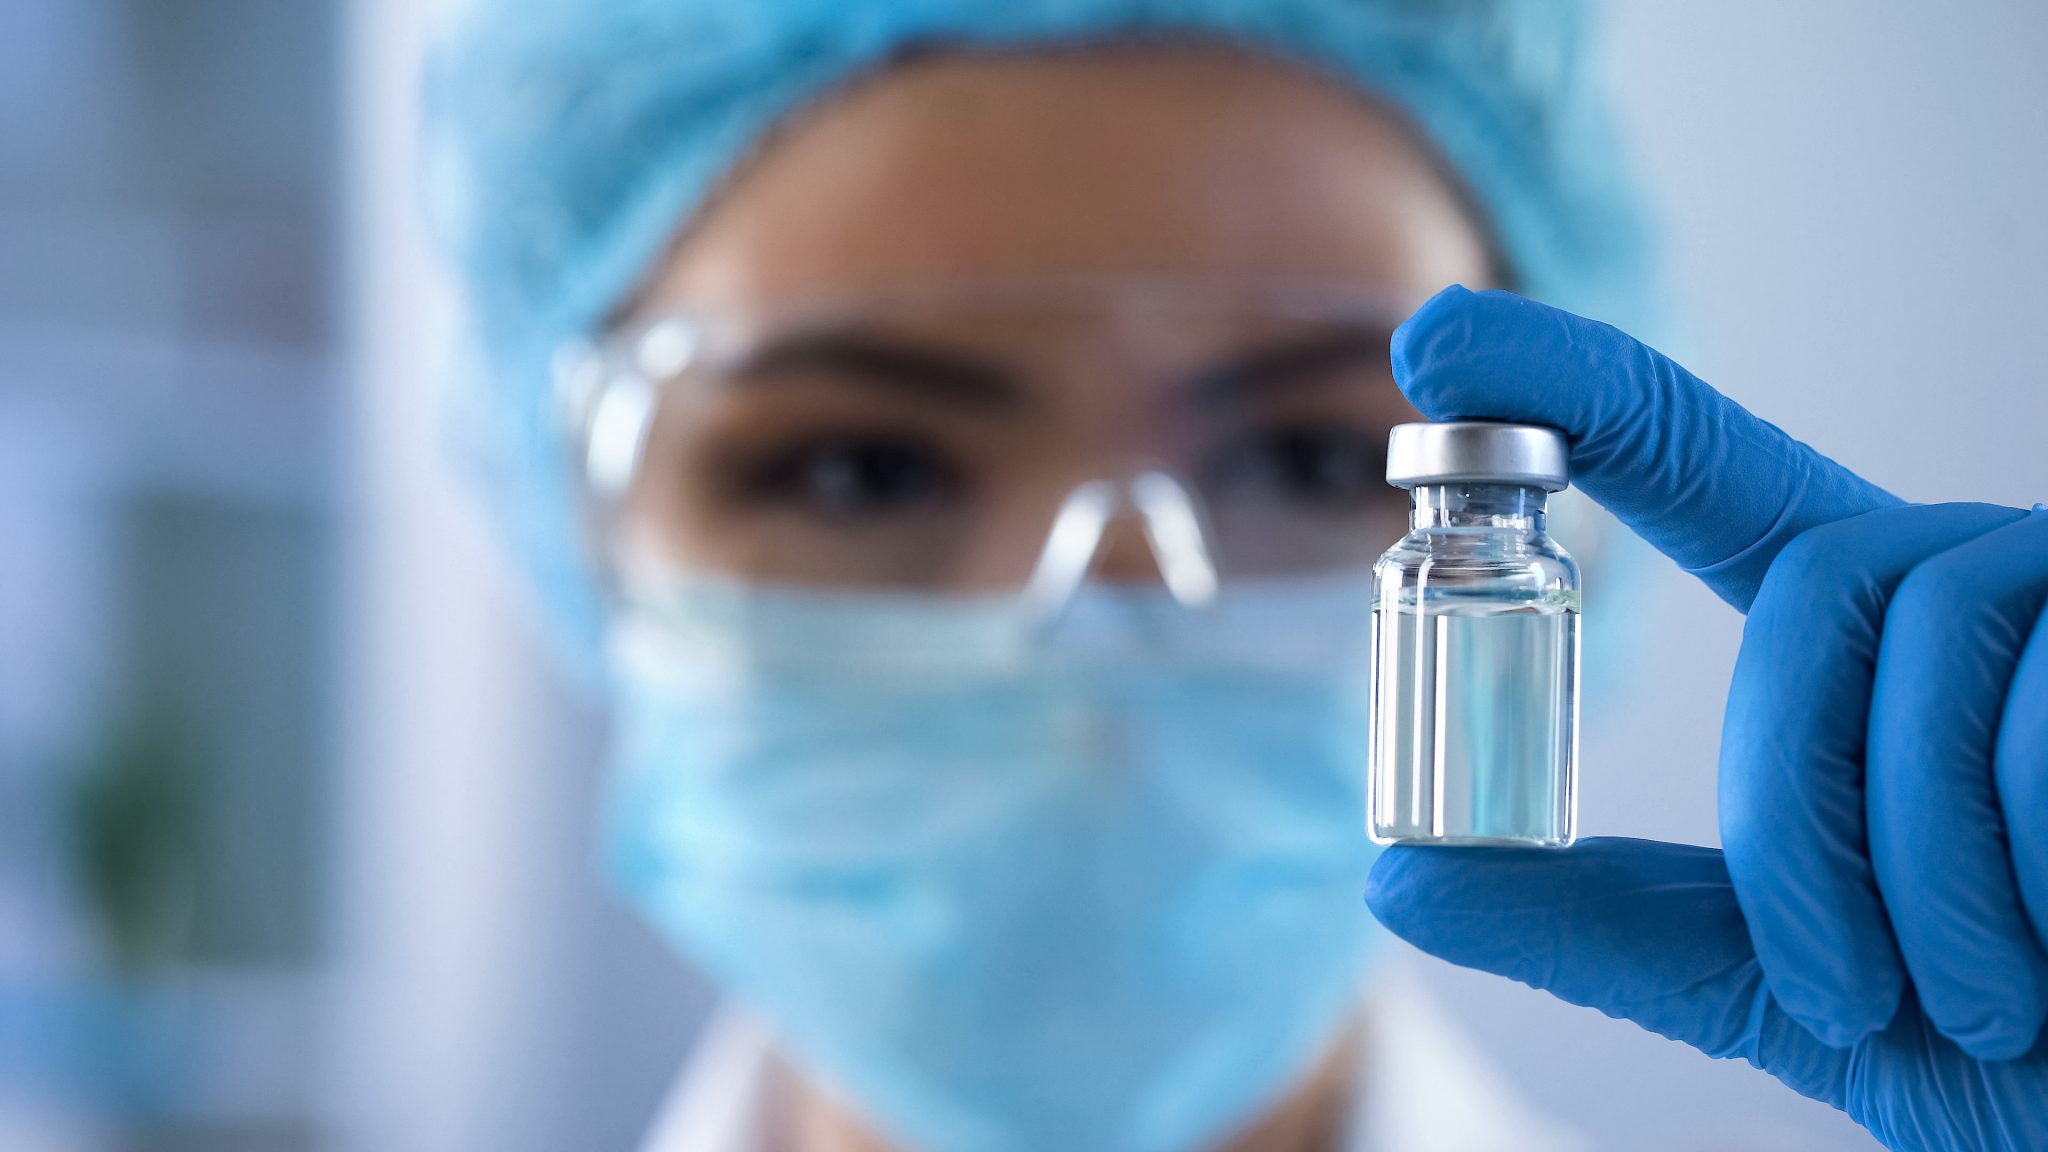 Close-up of a healthcare professional in a laboratory setting holding a vial of compounded GLP-1 medication.